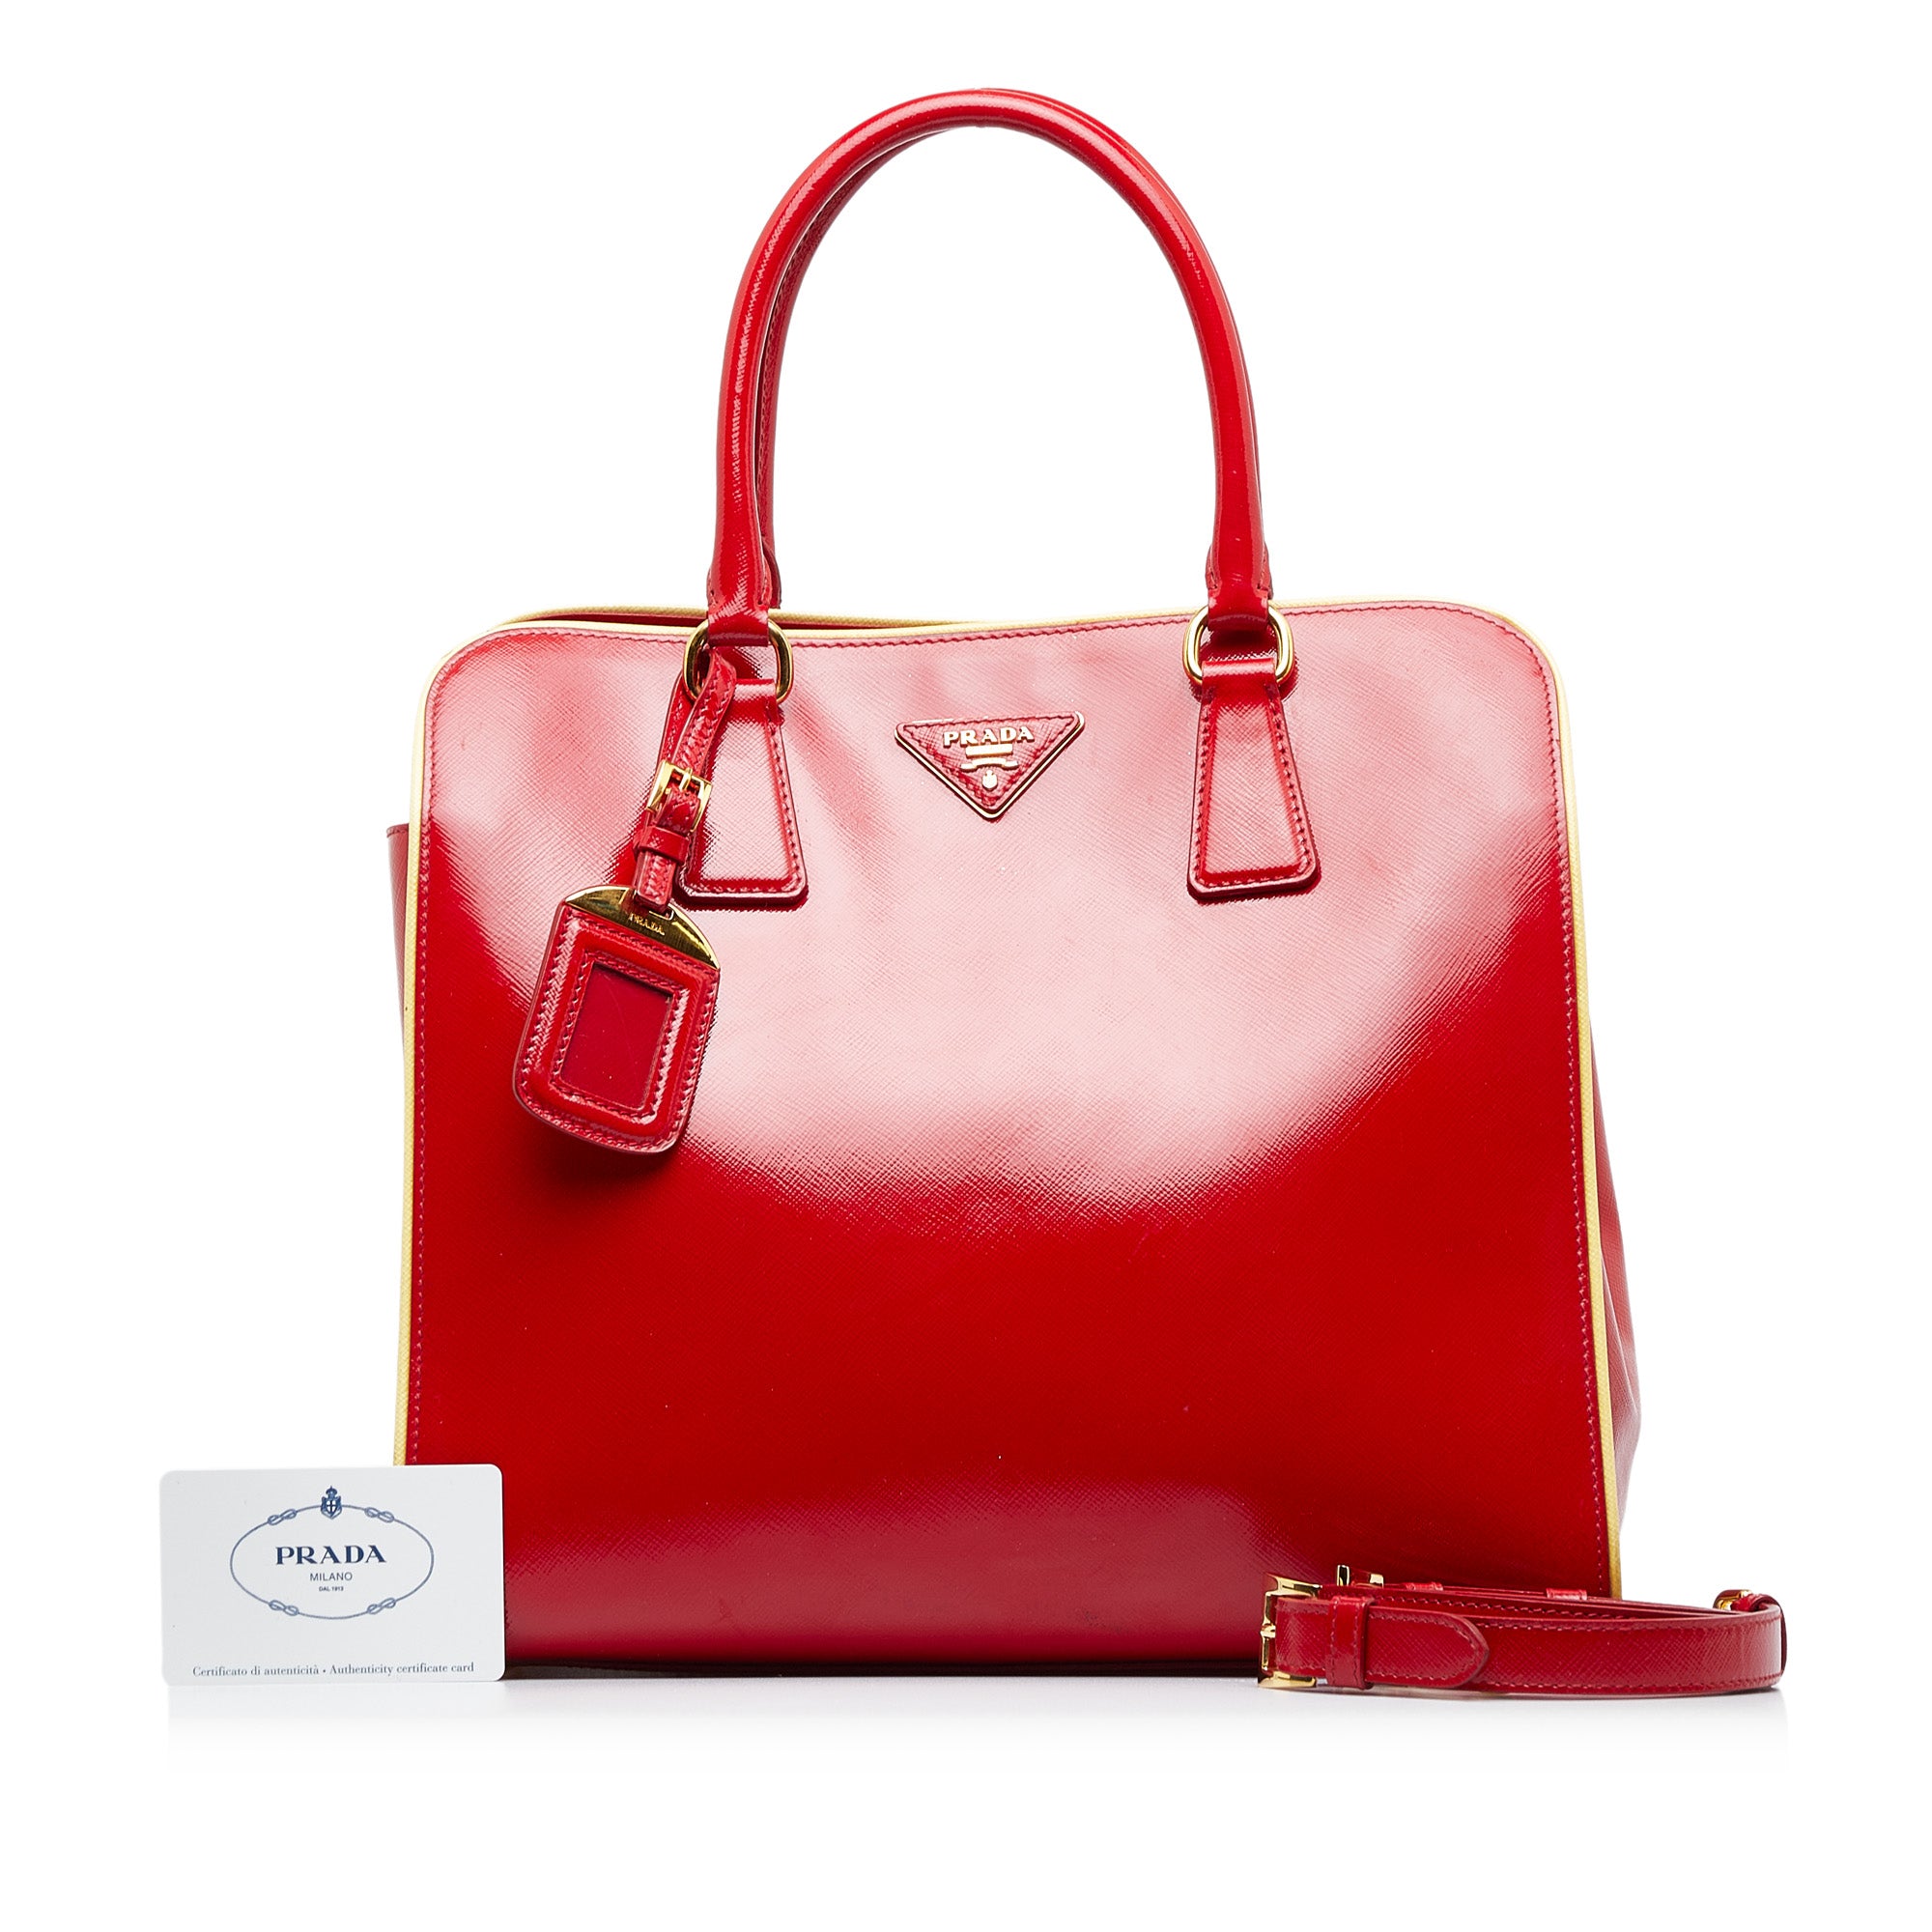 Louis Vuitton Montebello Red Patent Leather Handbag (Pre-Owned)